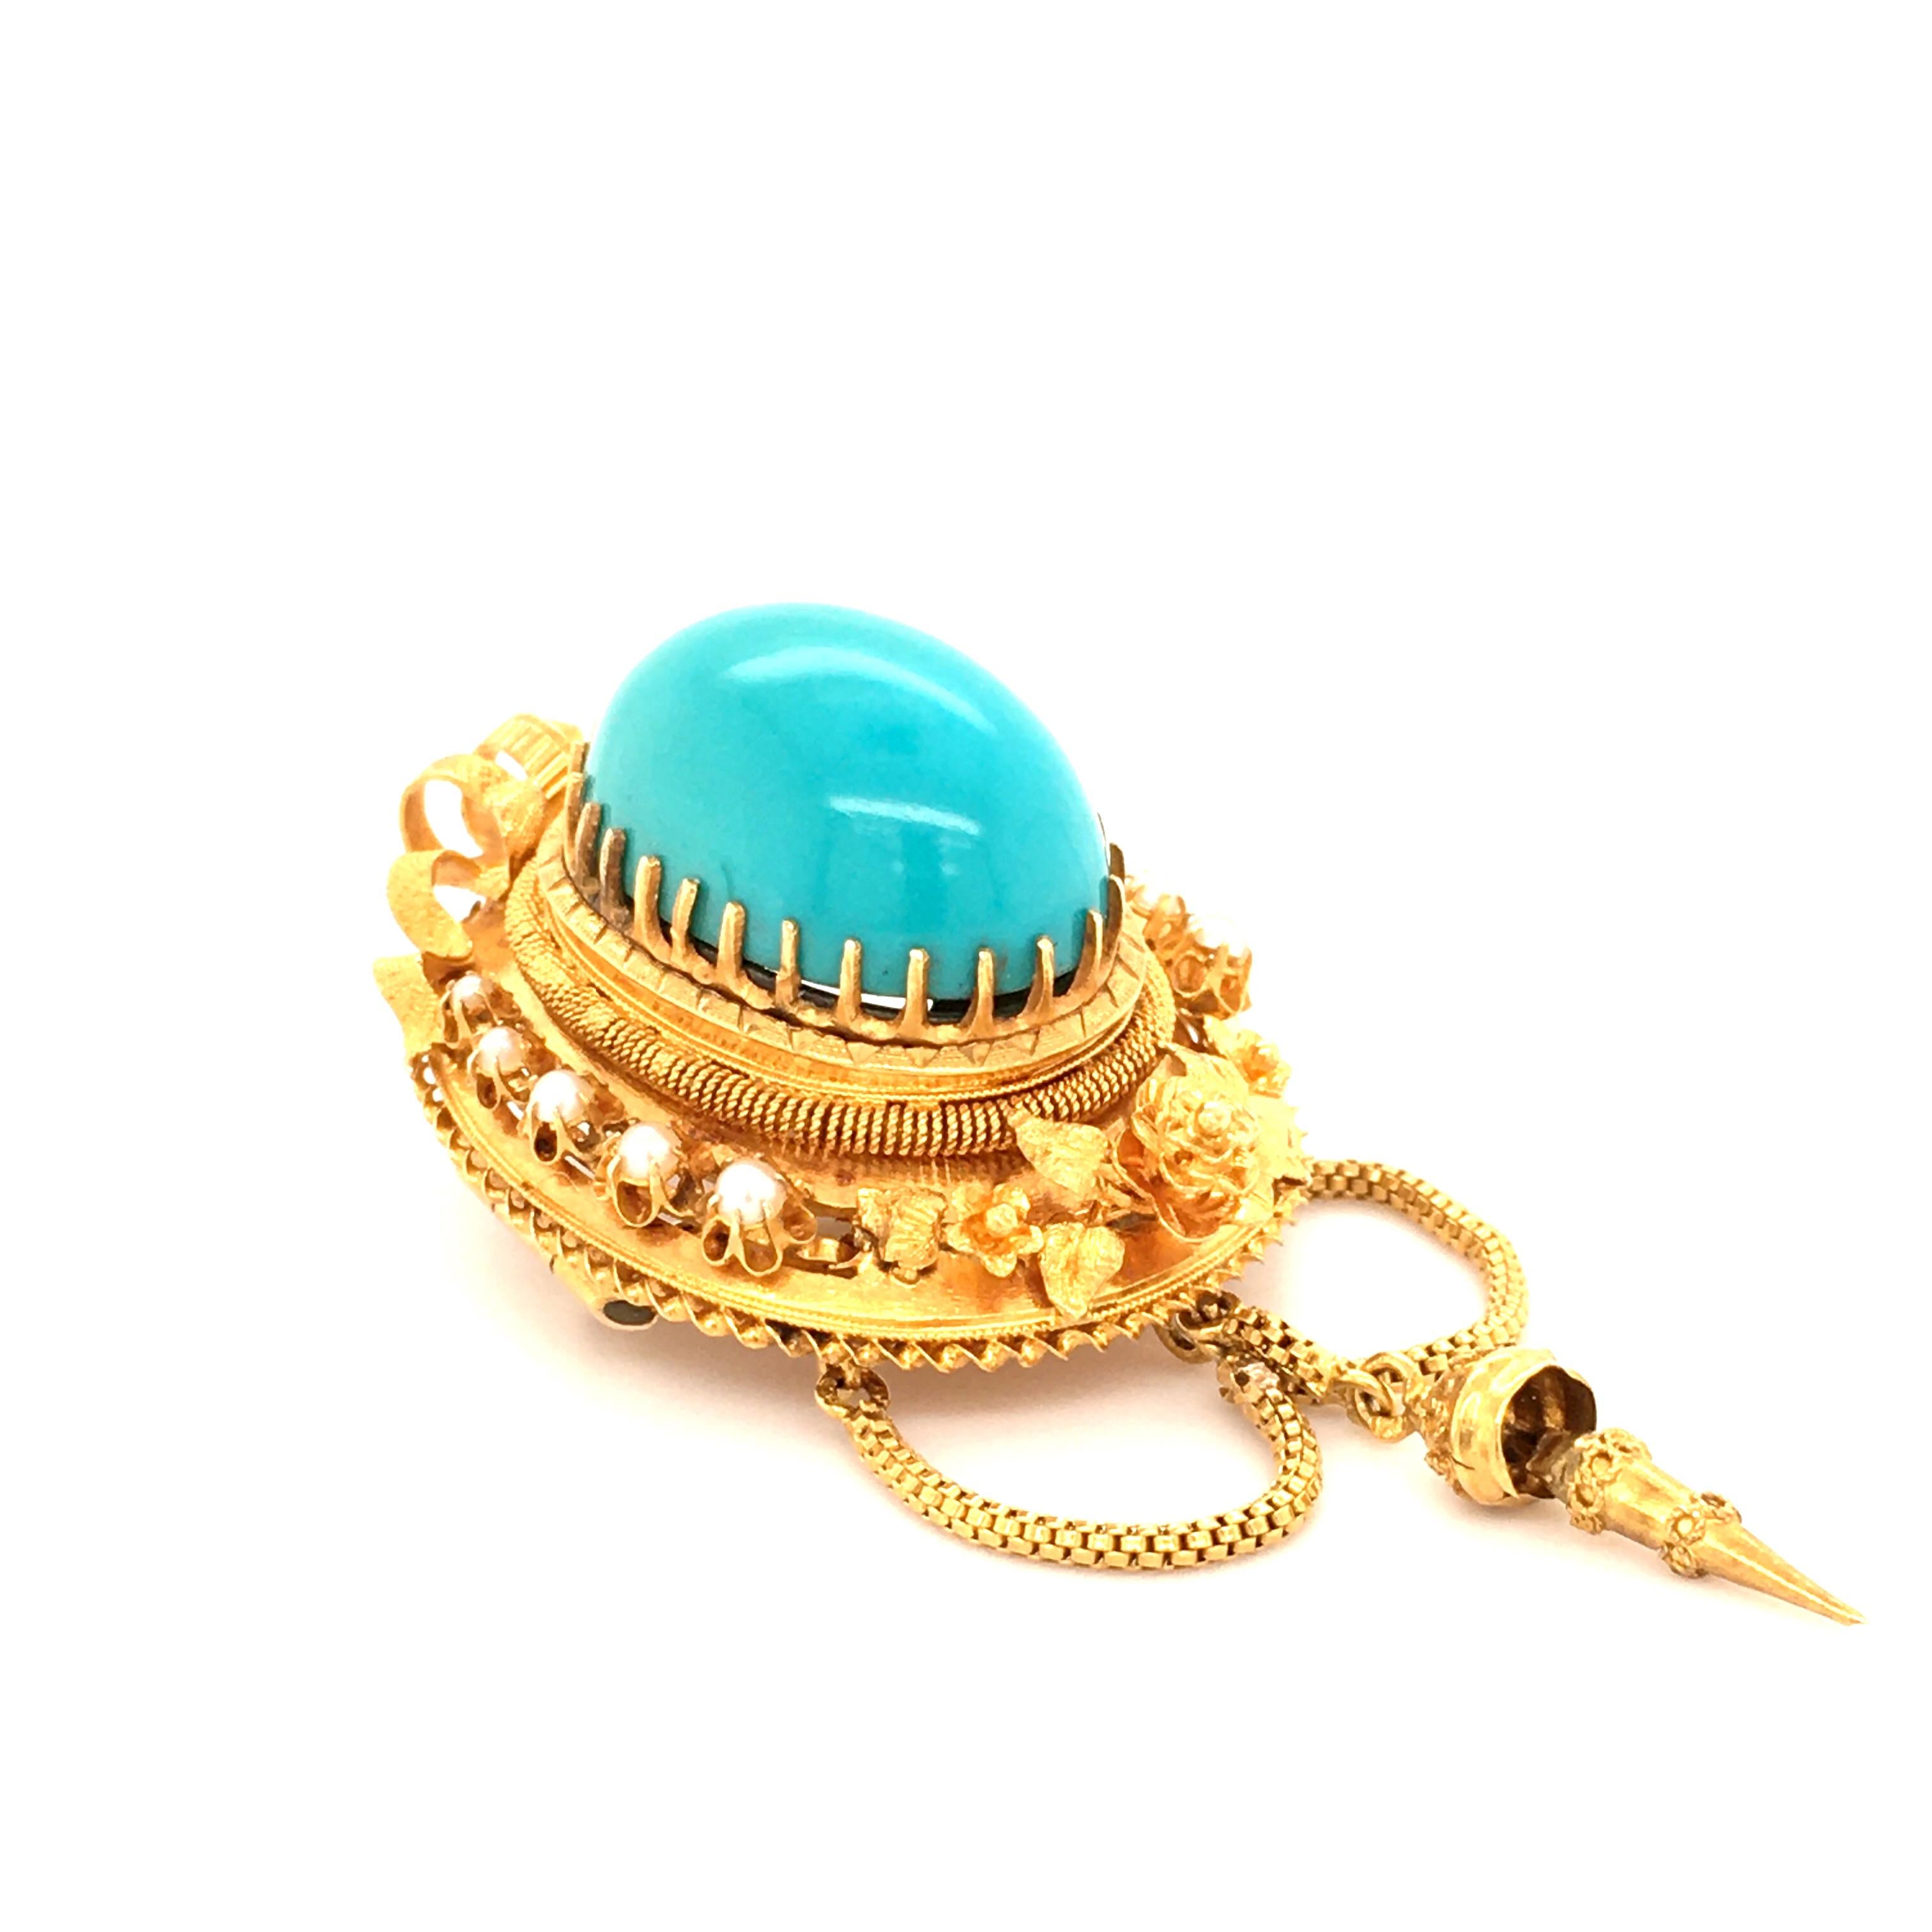 A superb brooch with a brightly colored turquoise Cabochon measuring 20 x 14mm, accented by ten natural pearls.
